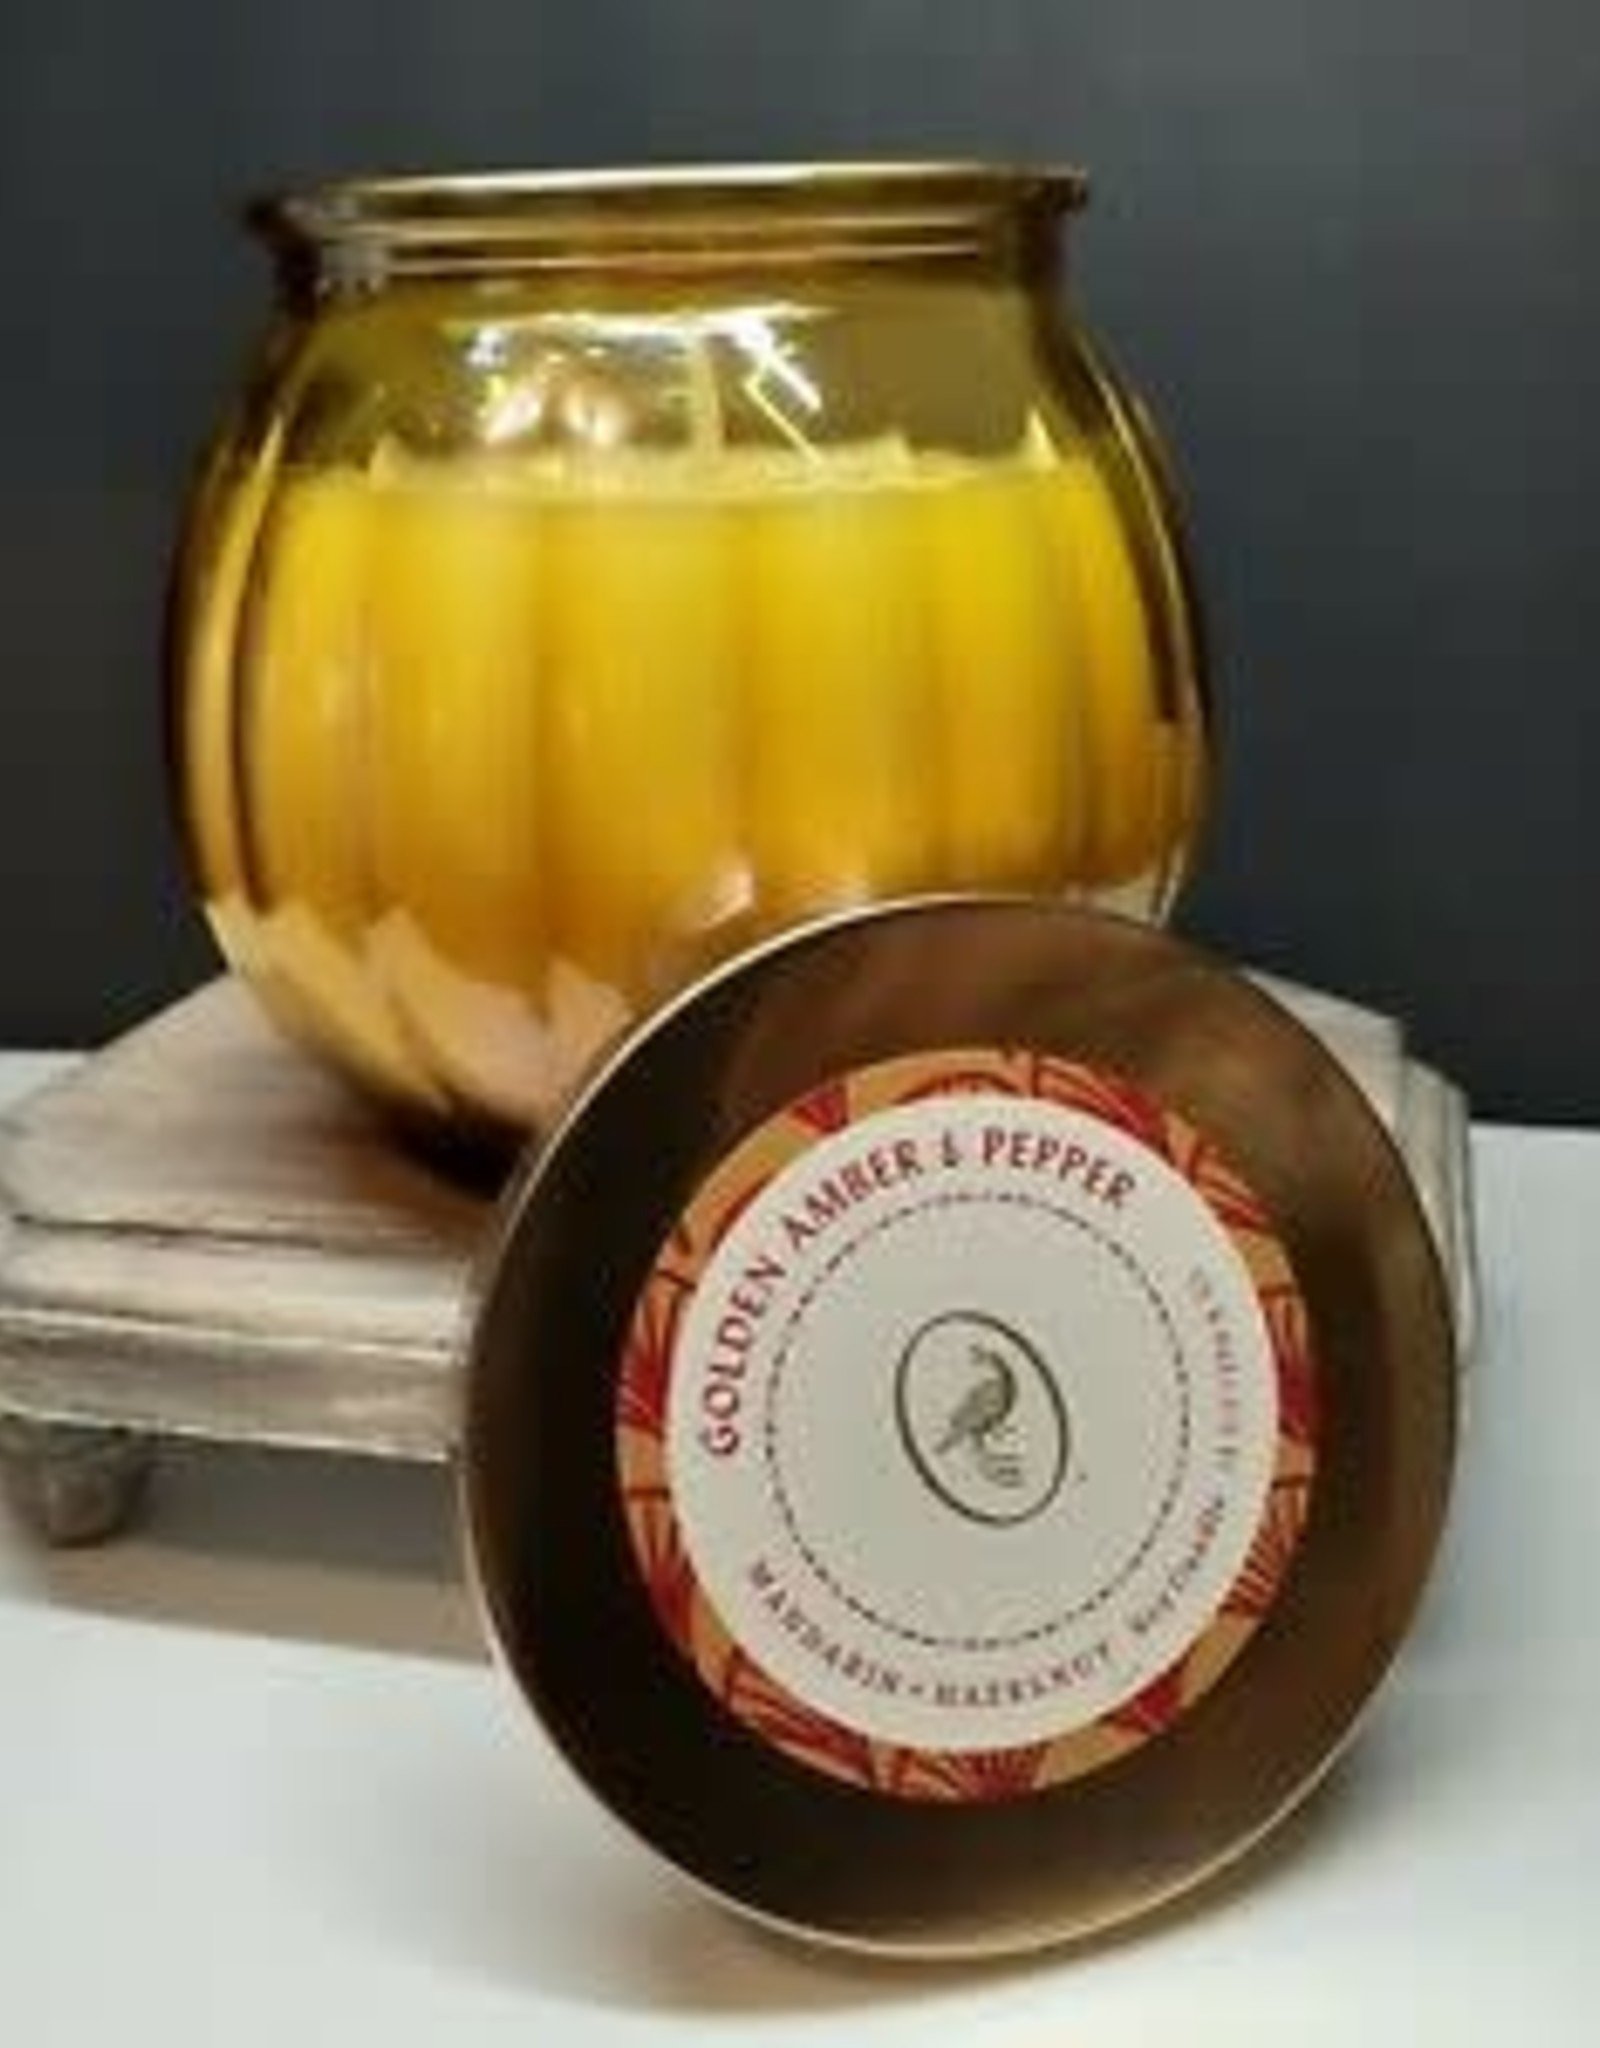 Golden Amber & Pepper Soy Candle 14oz